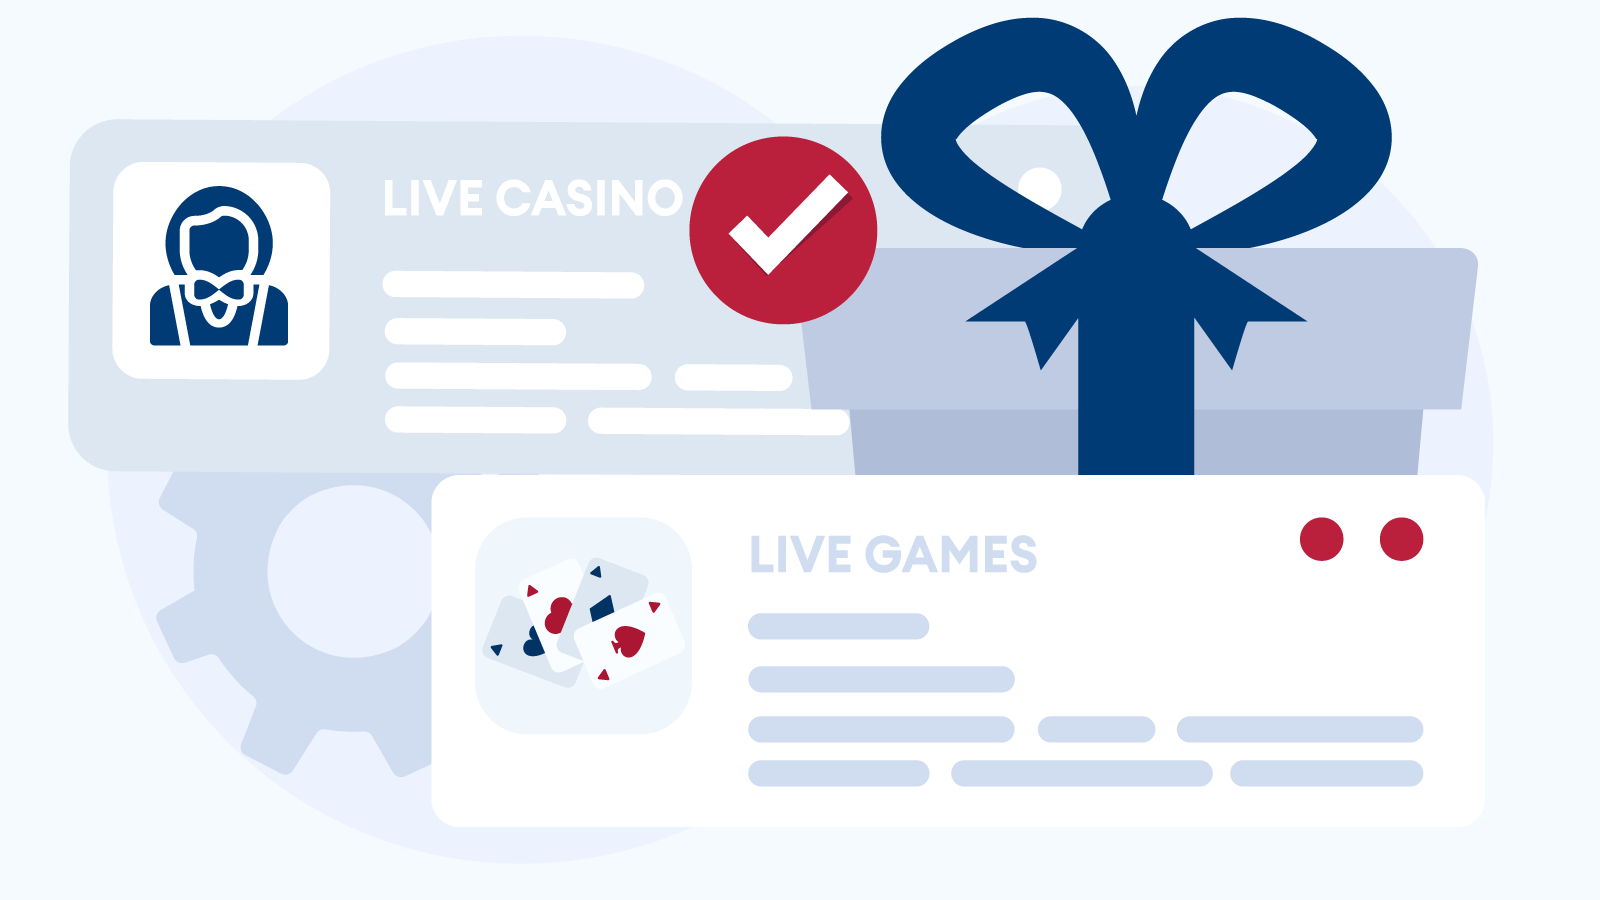 How to Use No Wagering Bonuses on Live Casino Games